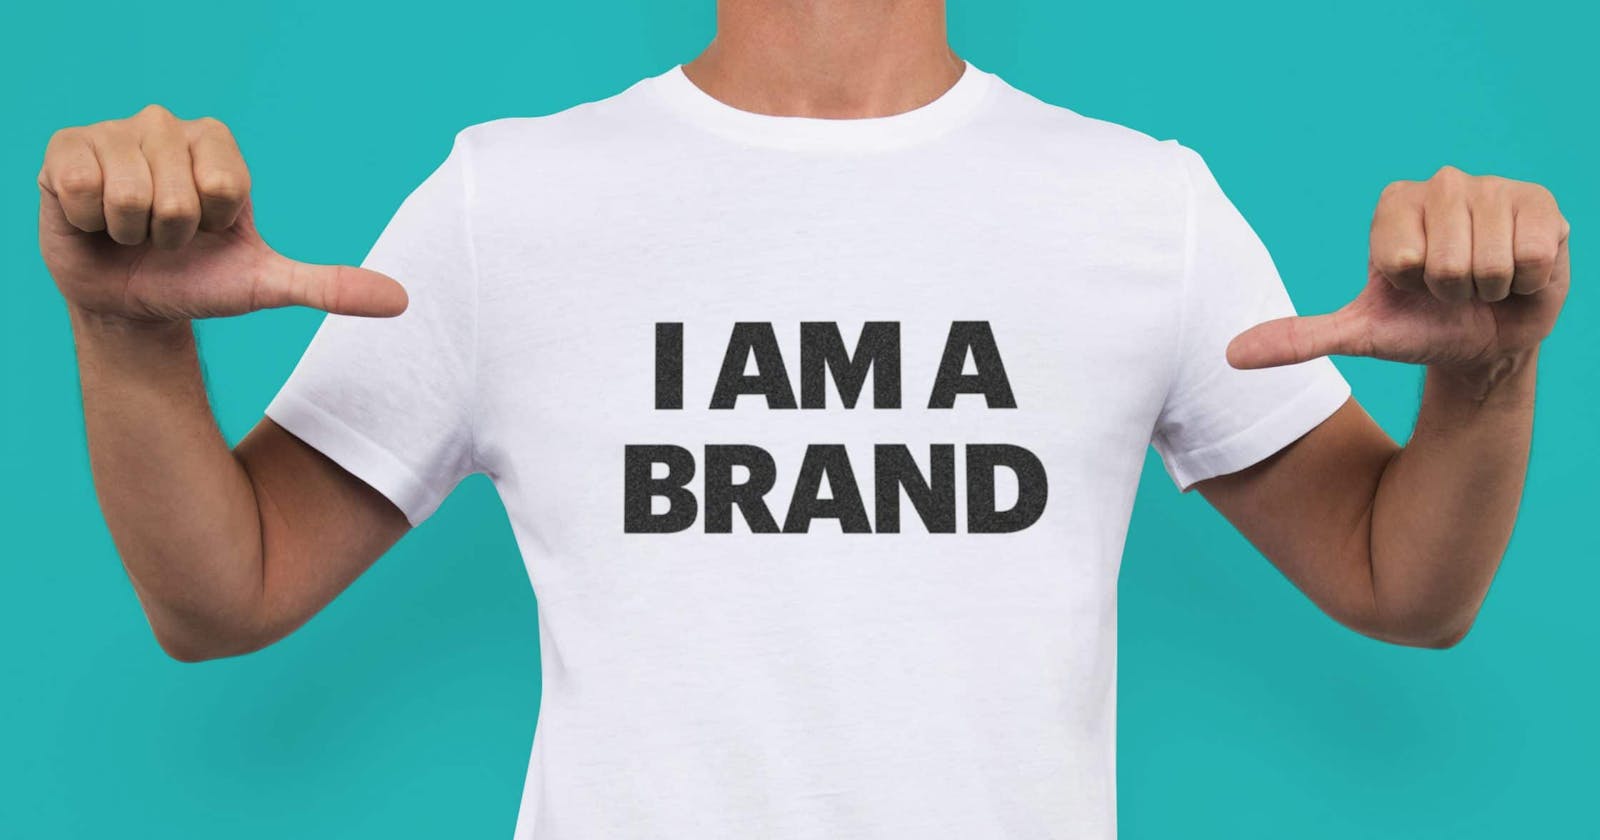 How to build a personal brand to stand out in your career.